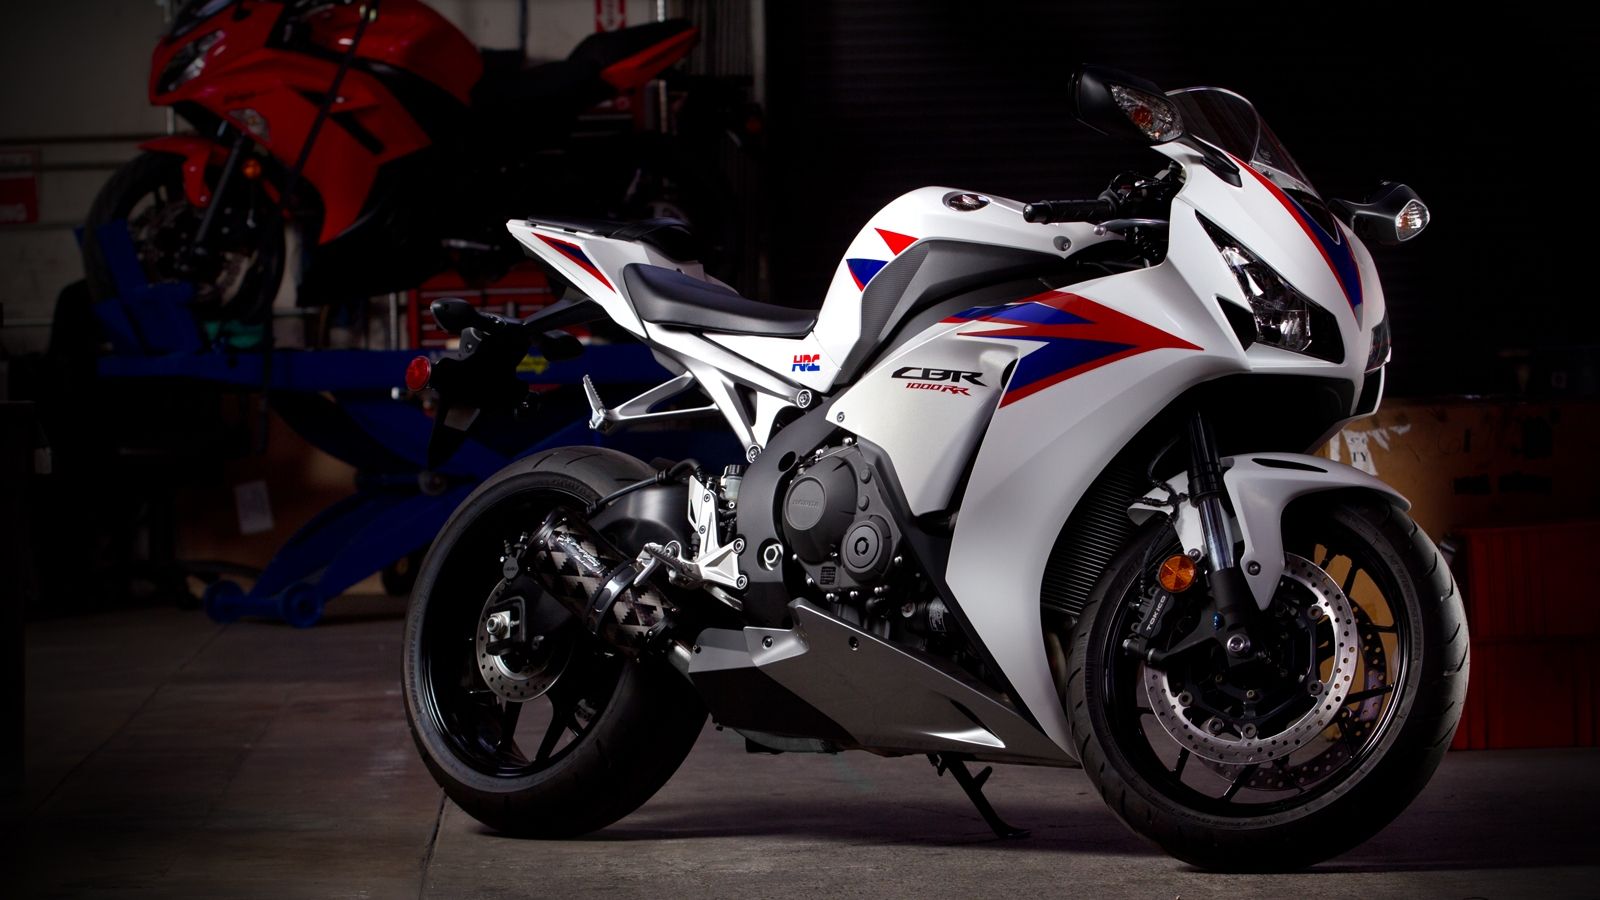 Free download Magnificent Honda CBR1000RR Wallpaper Full HD Picture [1600x1200] for your Desktop, Mobile & Tablet. Explore Honda Cbr1000rr Wallpaper. Honda Cbr1000rr Wallpaper, Honda Cbr1000rr Wallpaper, Honda CBR1000RR 2017 Wallpaper